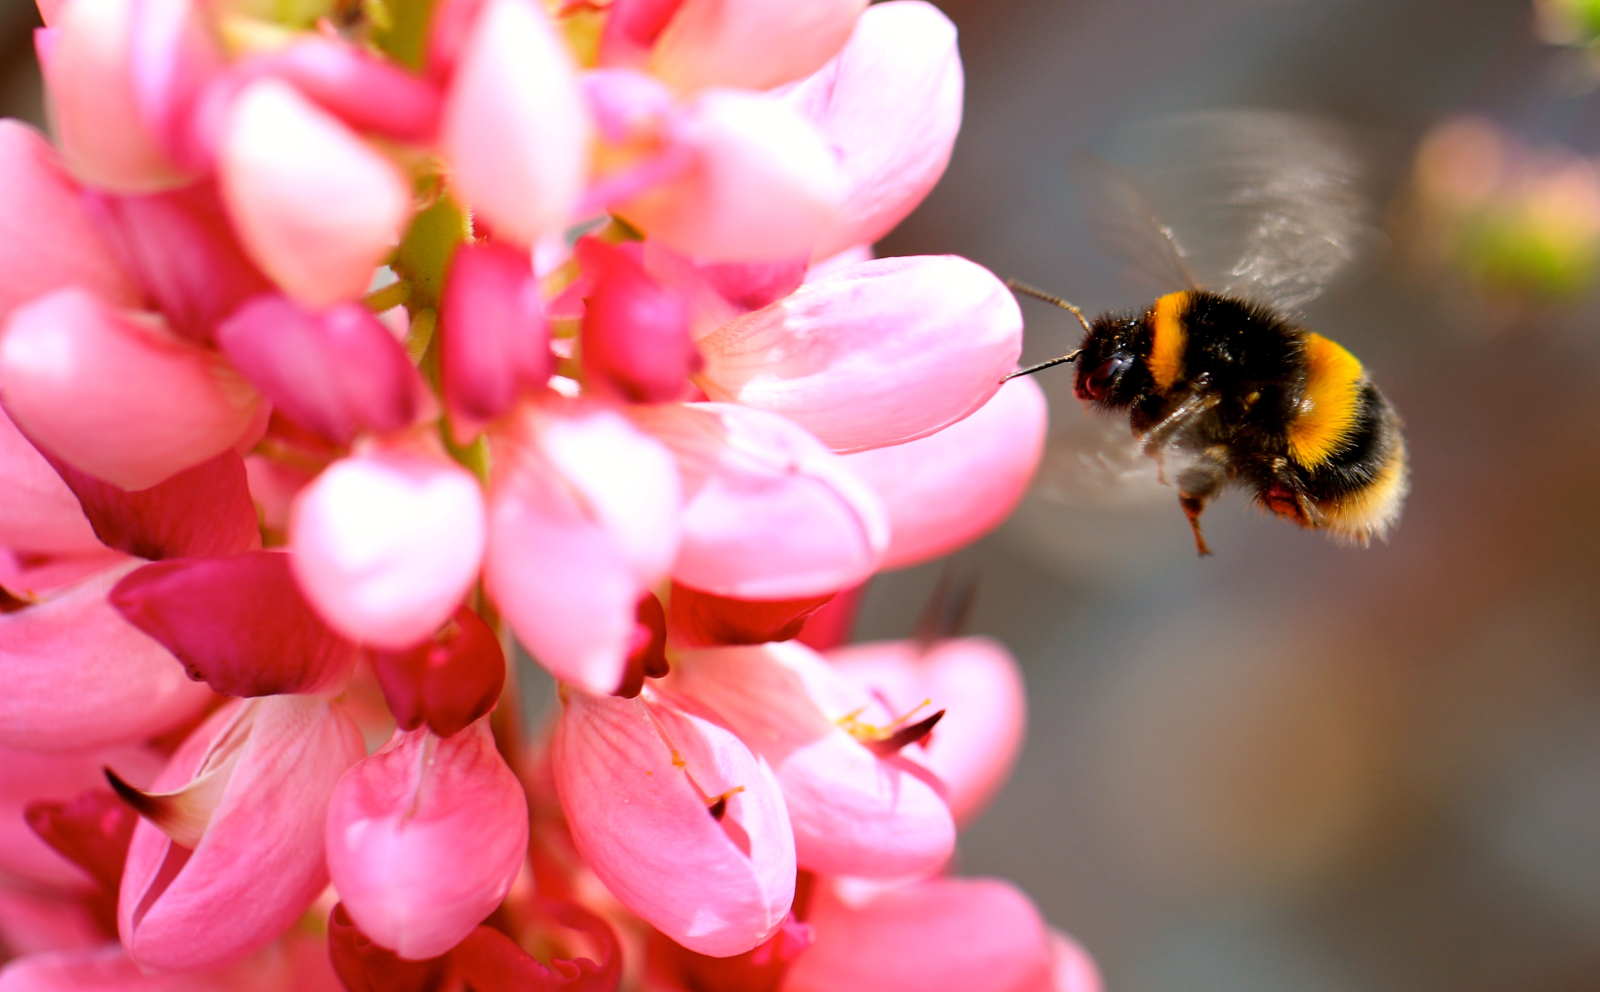 A black and yellow bumblebee floats next to a pink flower